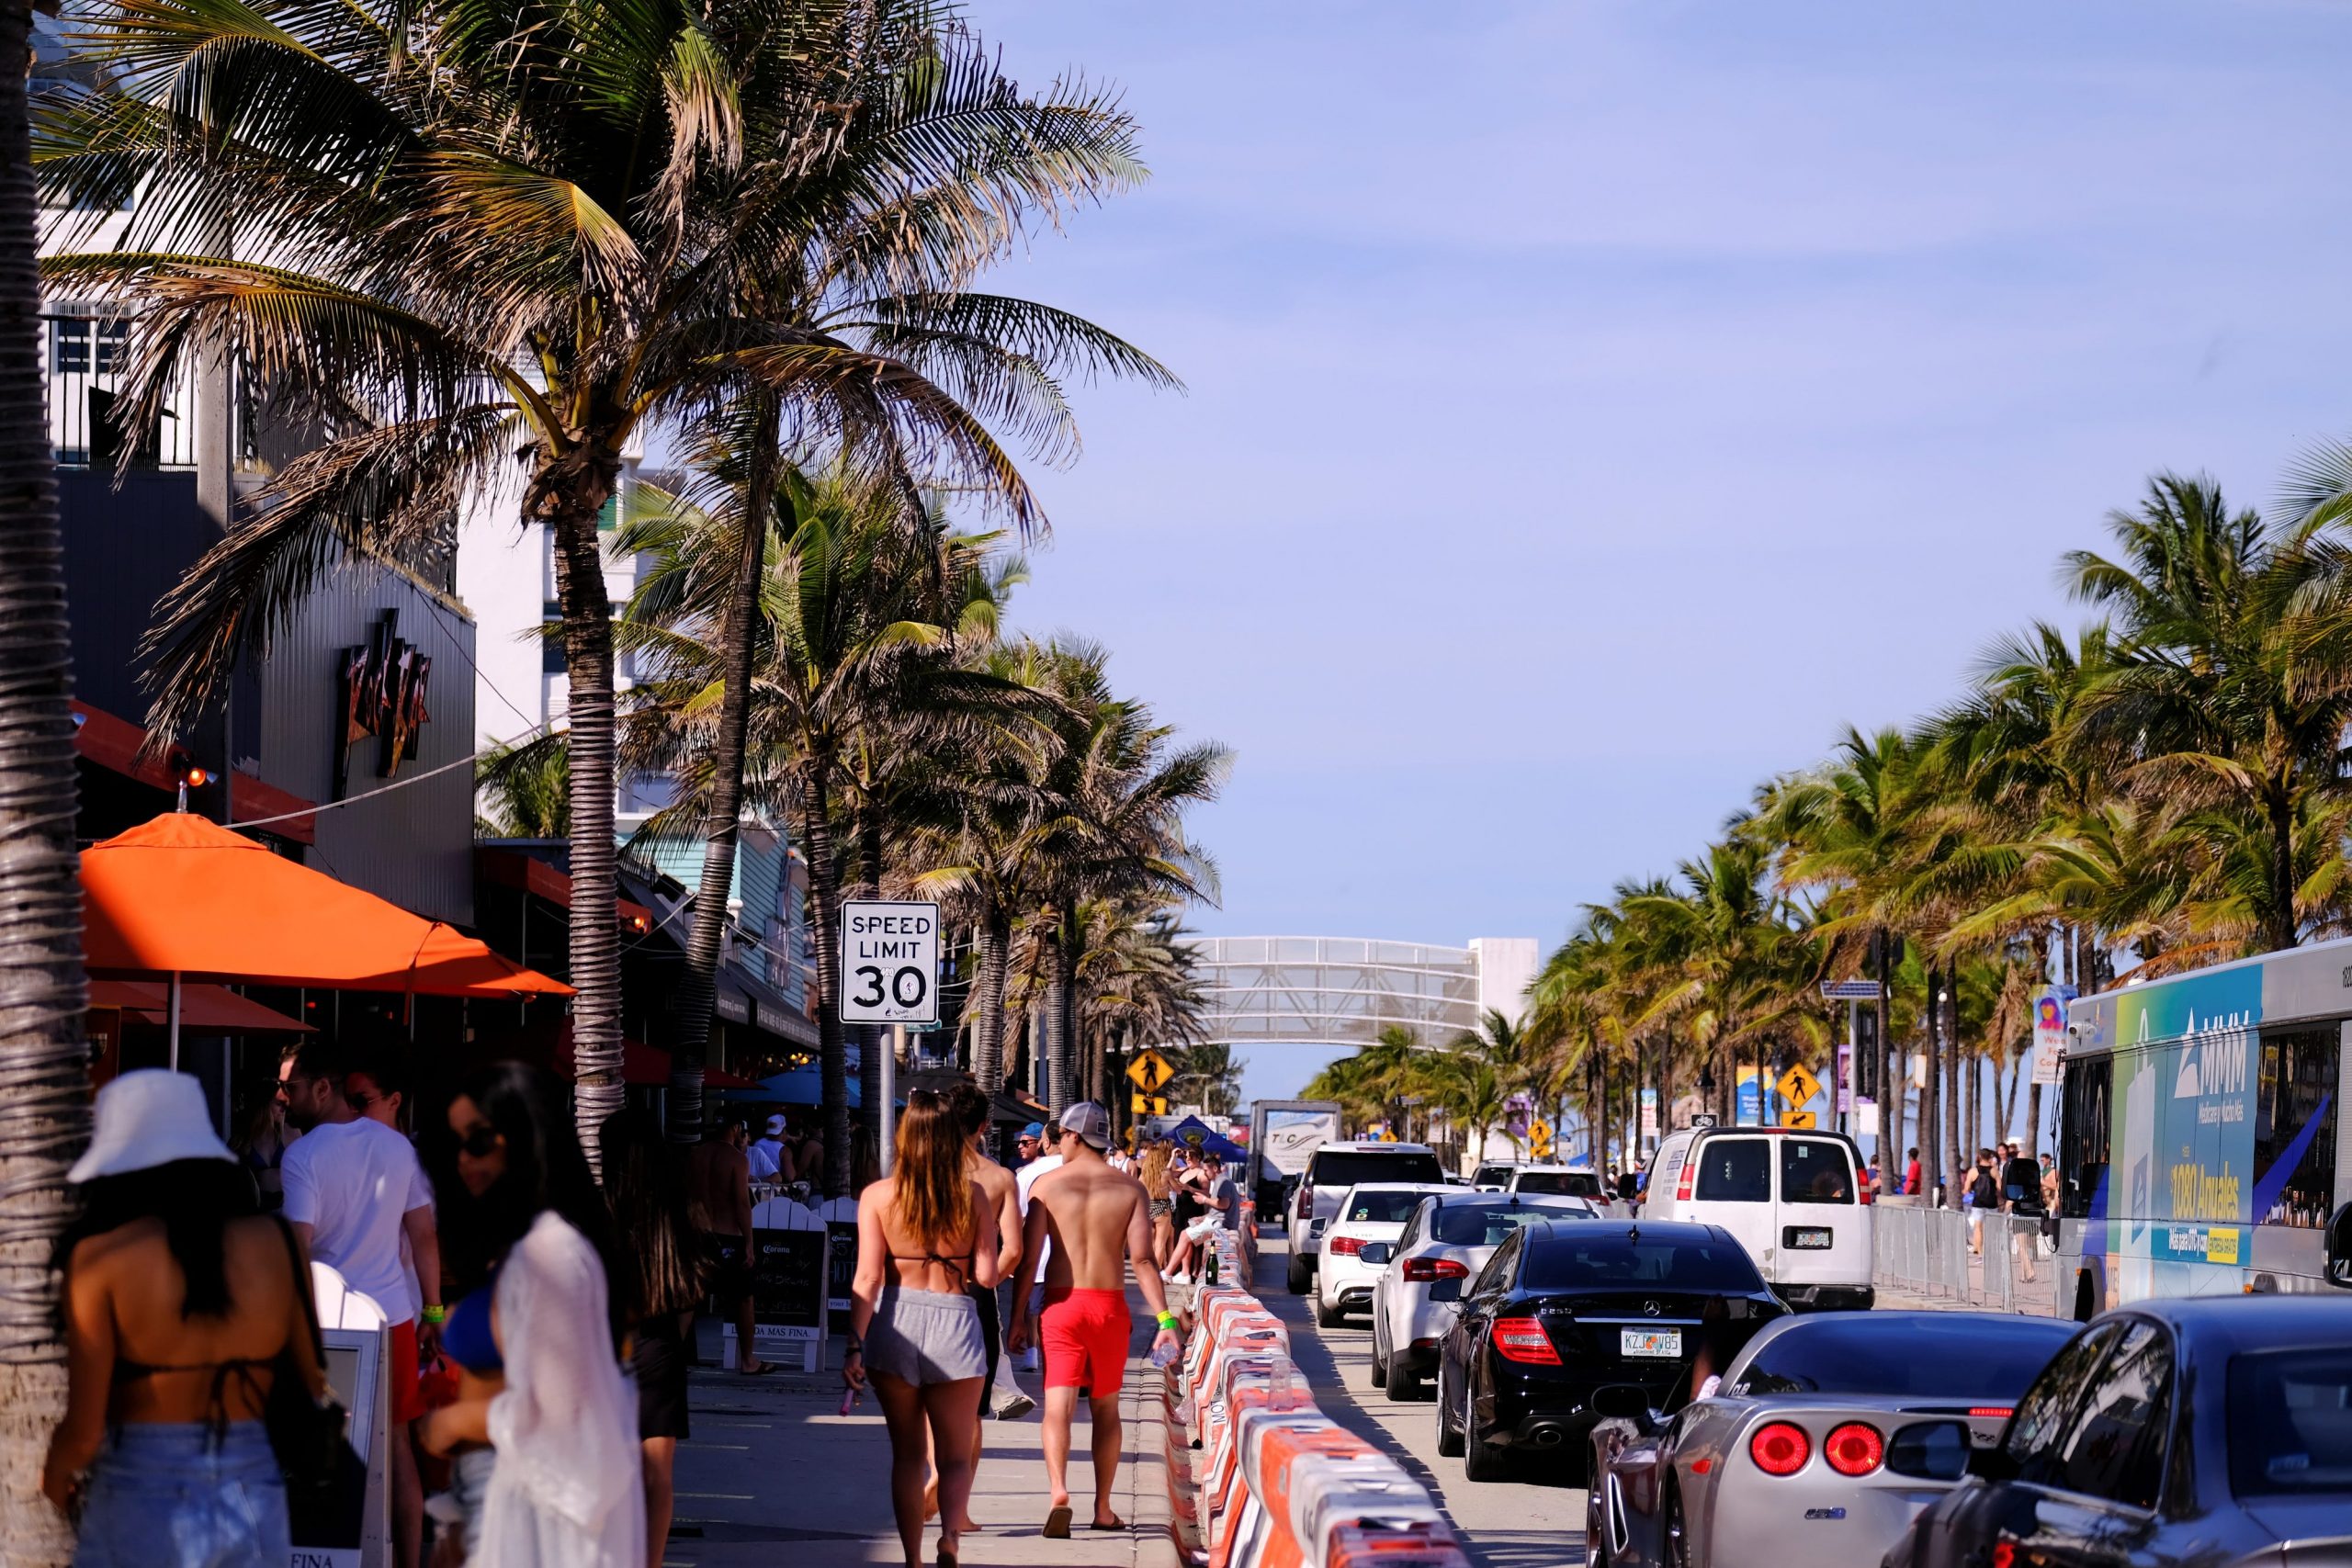 Beachgoers in bathing suits walk alongside a row of stopped traffic in sunny Fort Lauderdale